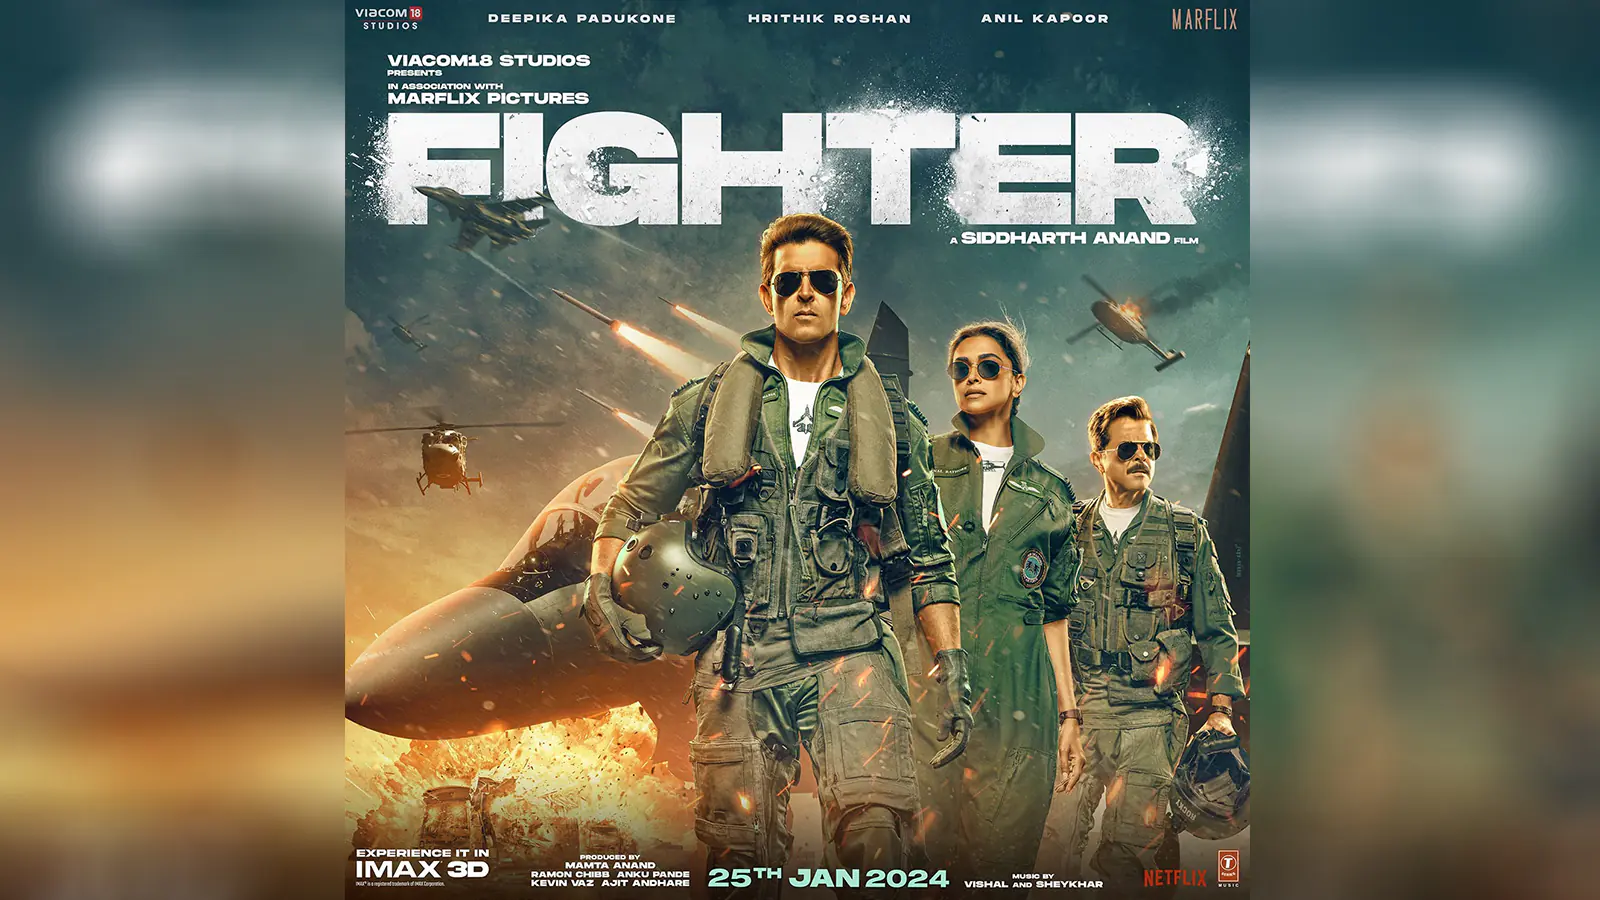 Countdown Begins: Hrithik Roshan, Deepika Padukone, and Anil Kapoor Gear Up for Action-Packed 'Fighter' Release on January 25!